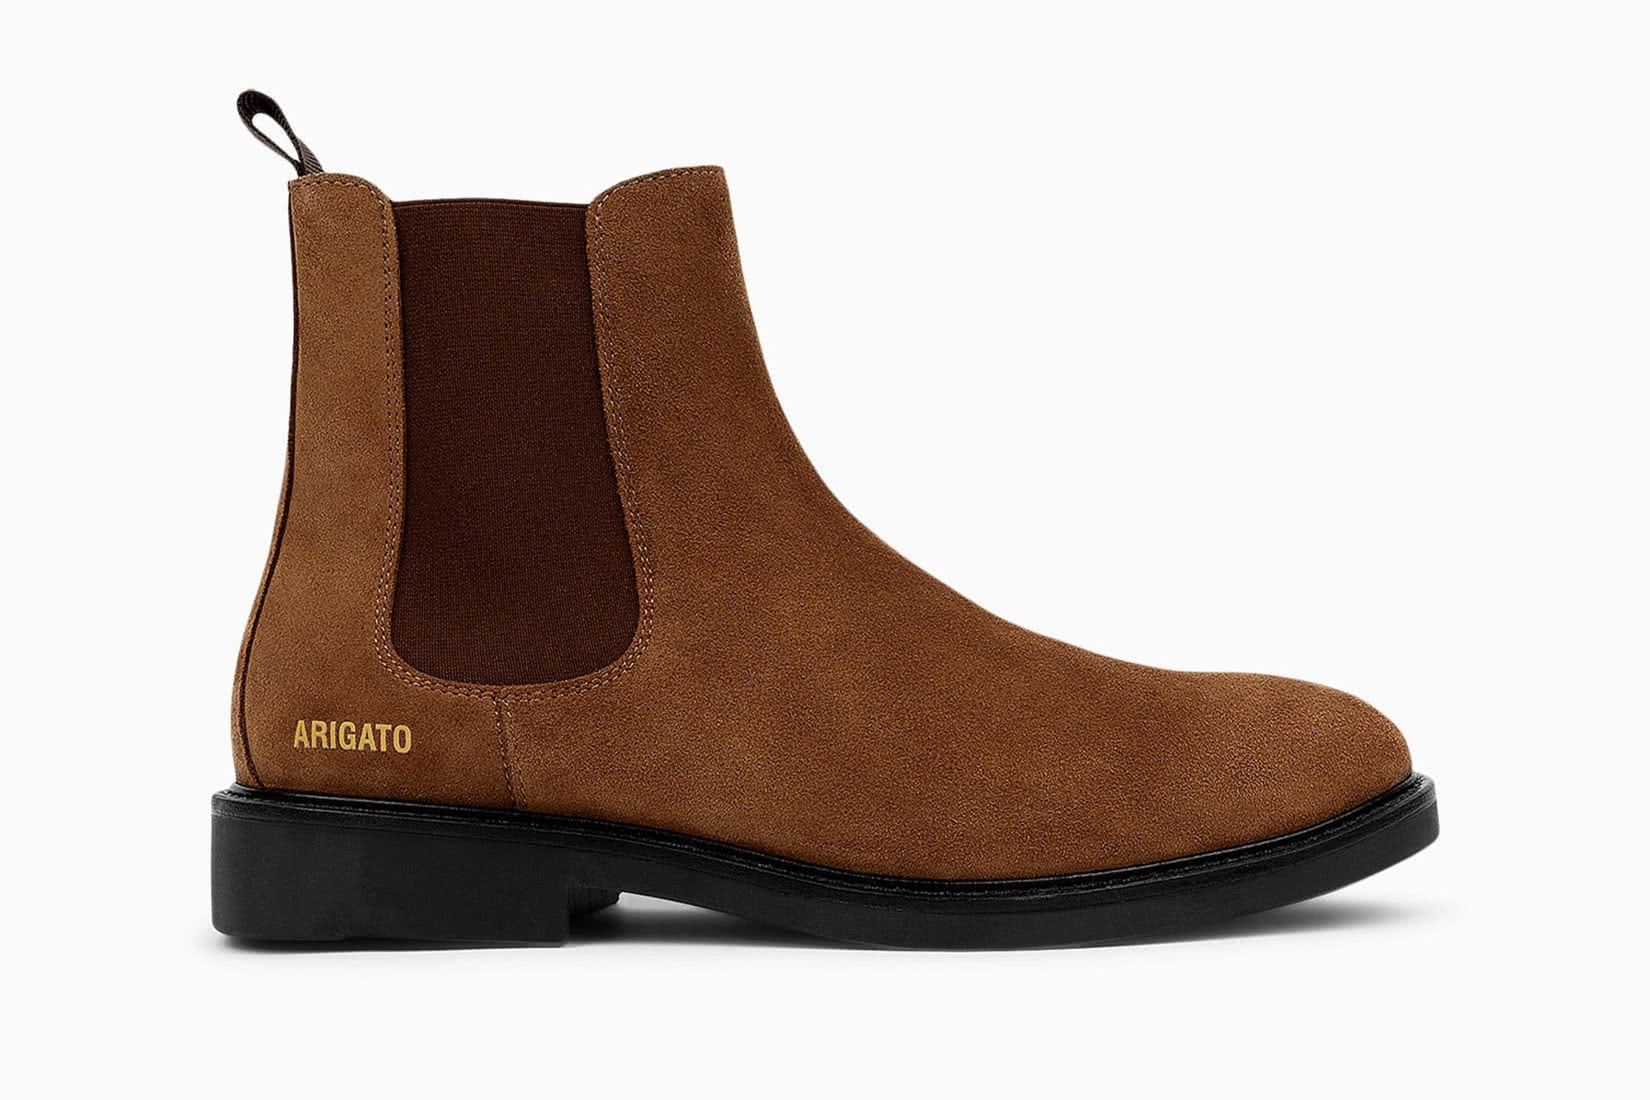 most comfortable Chelsea boots men axel arigato review - Luxe Digital